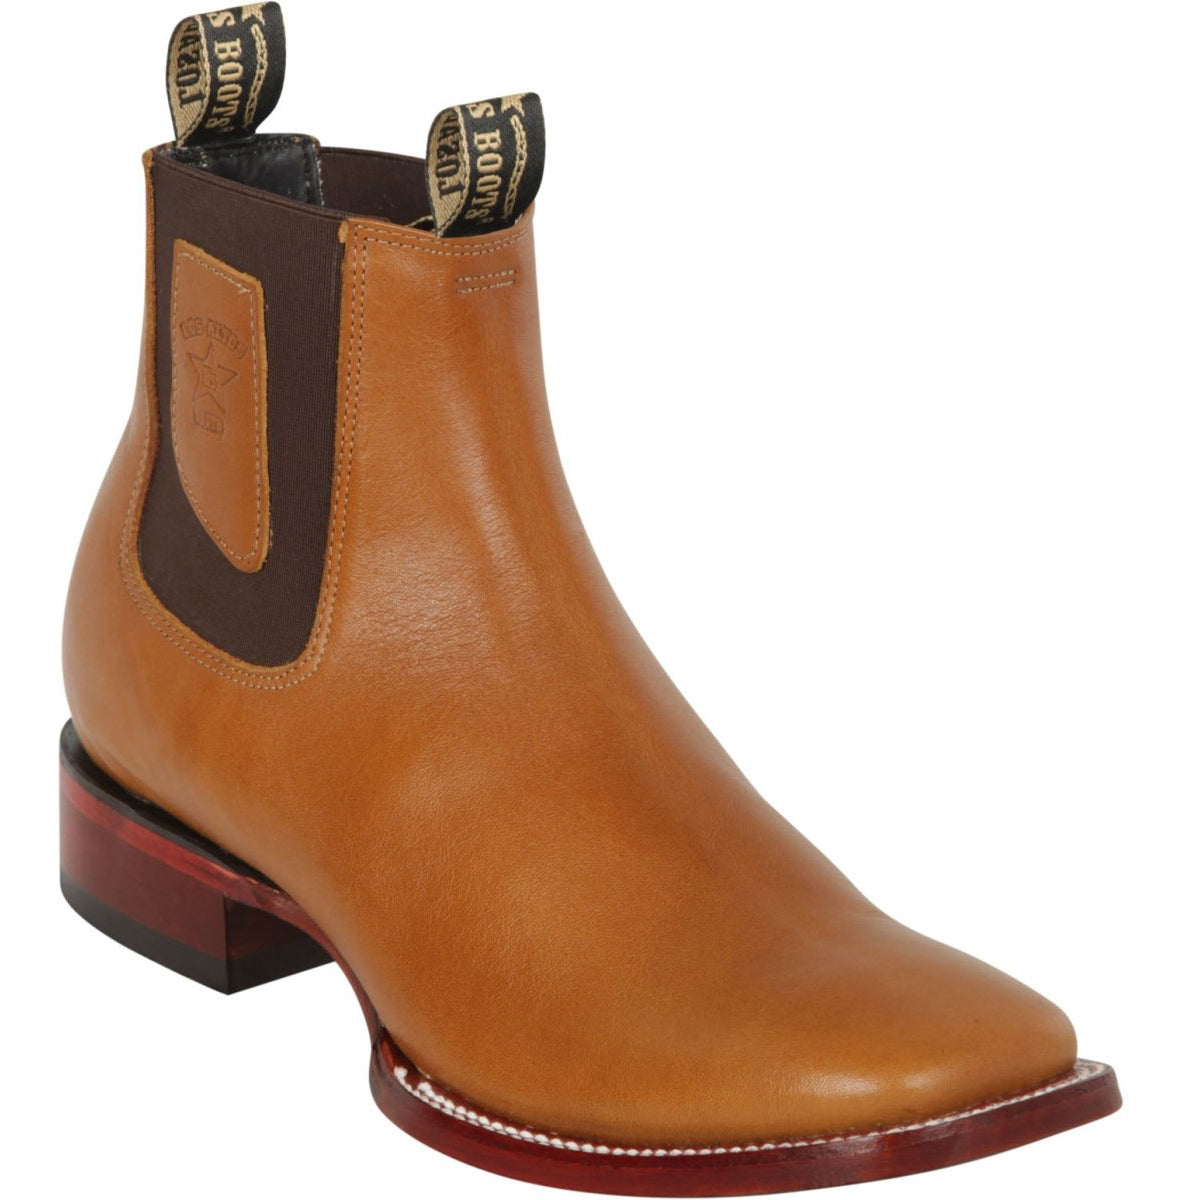 Honey Brown Square Toe Ankle Boots - Los Altos Boots